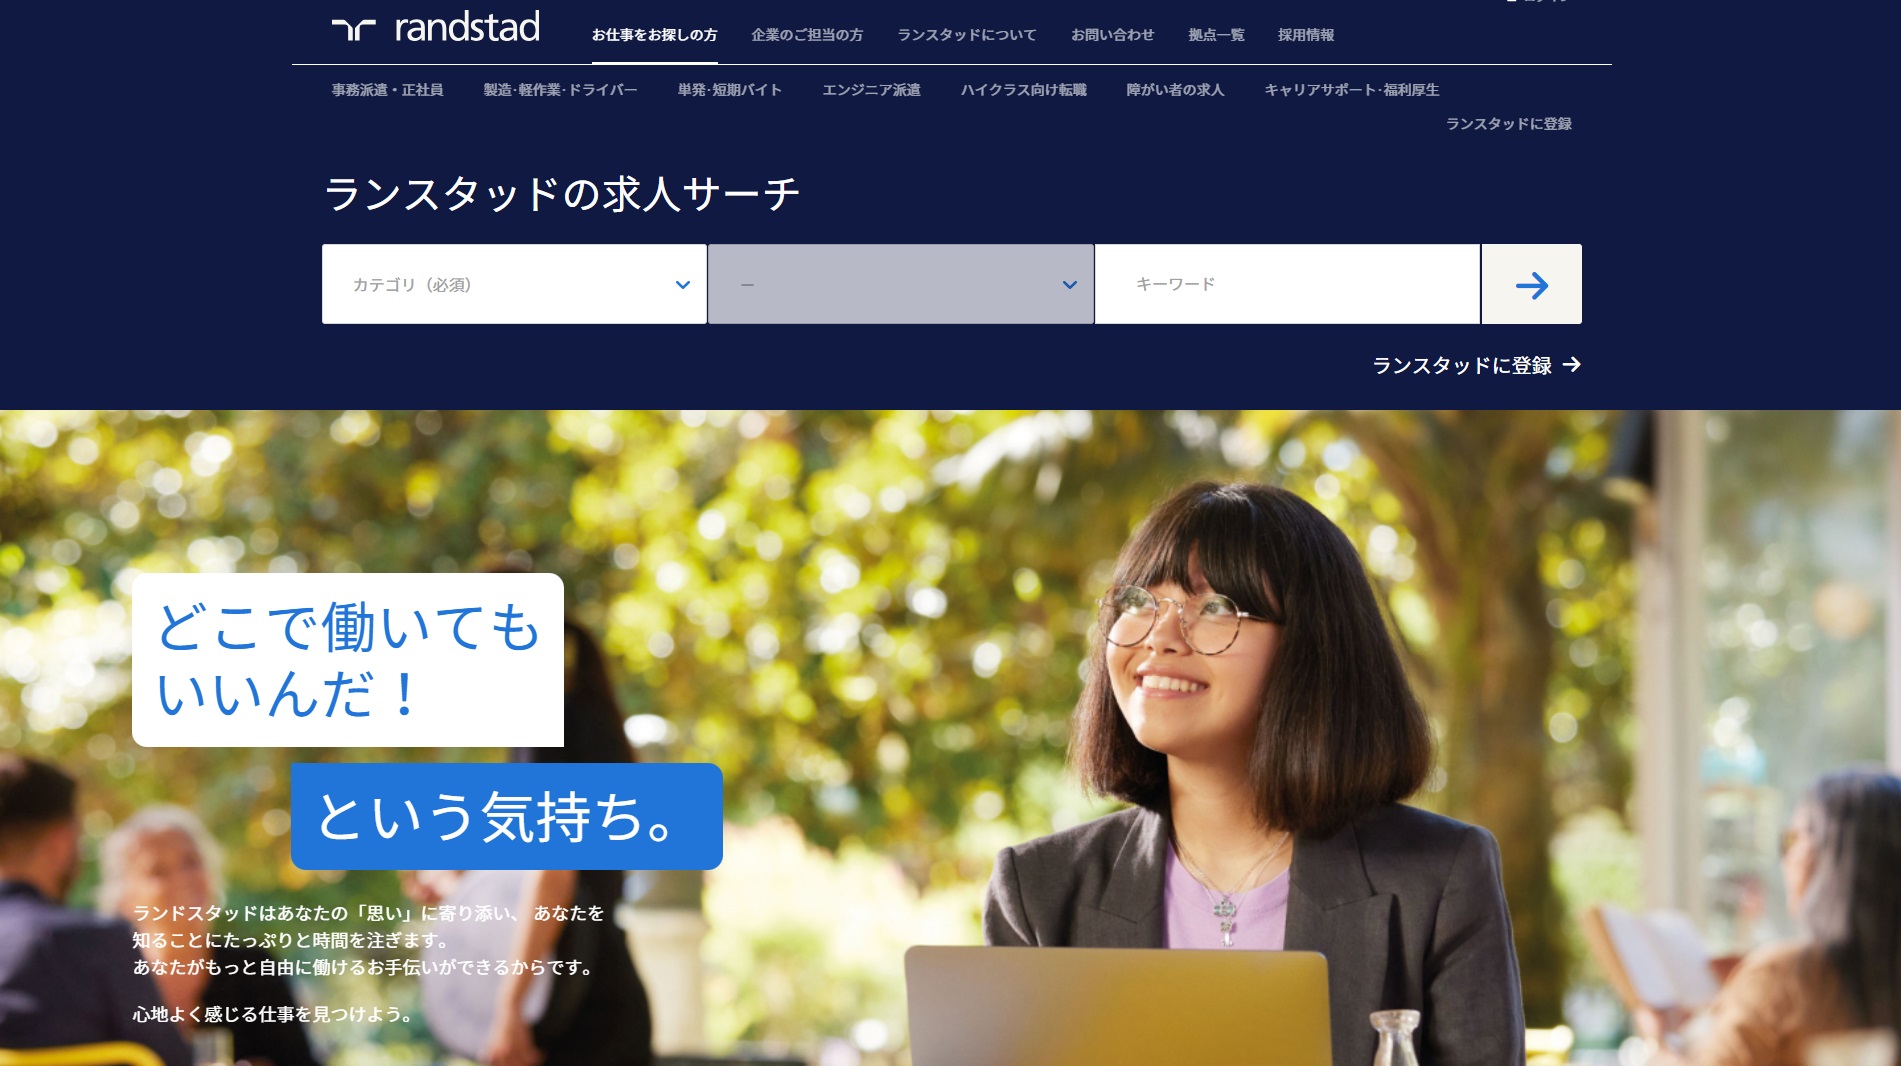 randstad　find what's next　ランスタッドの求人サーチ